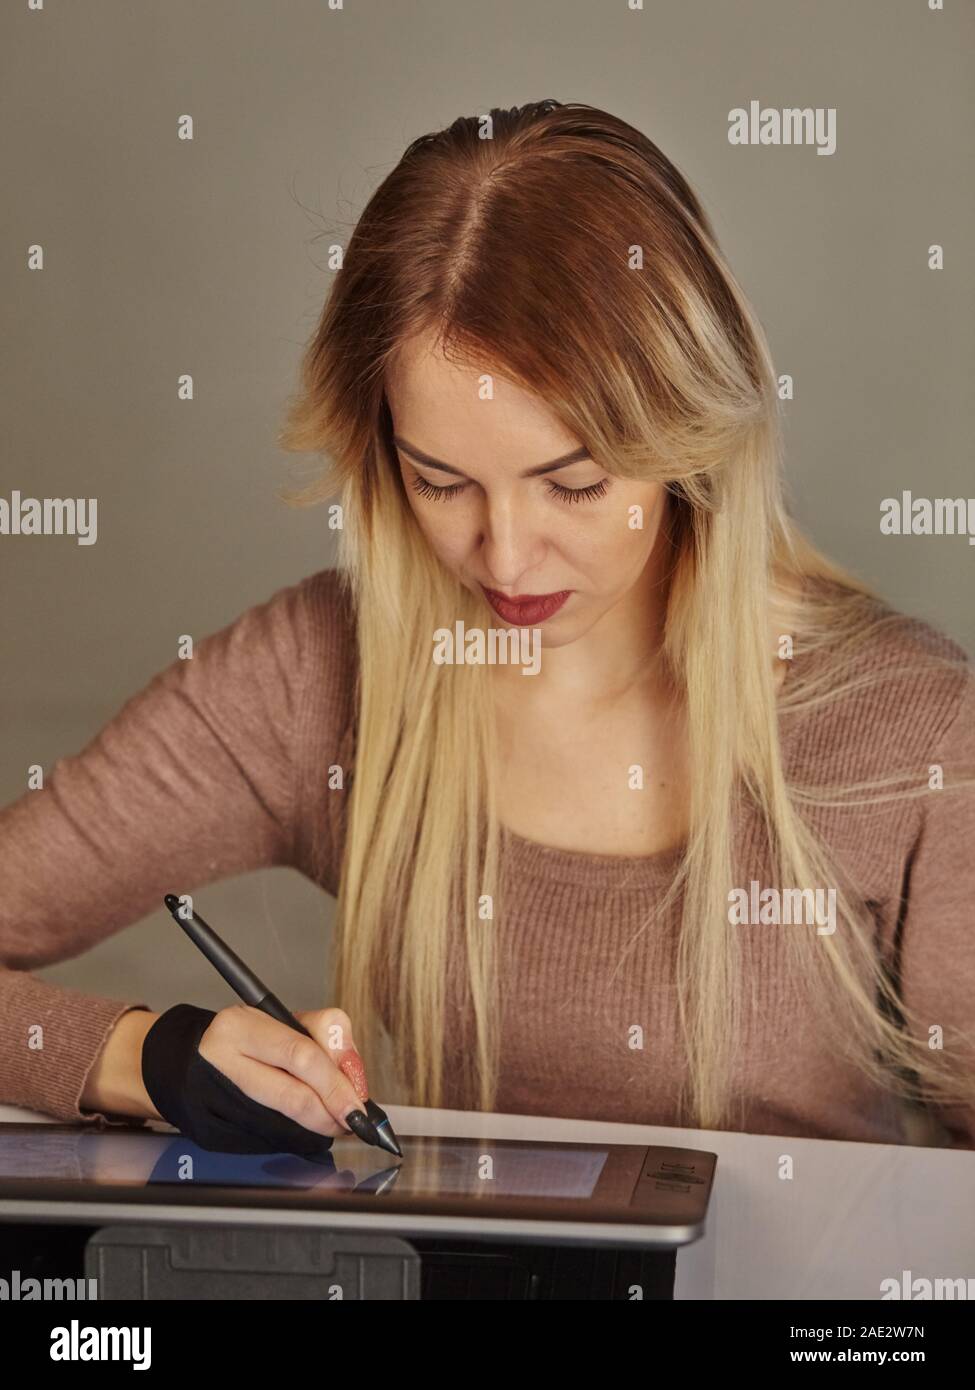 girl artist draws a digital pen on a professional tablet in her studio Stock Photo